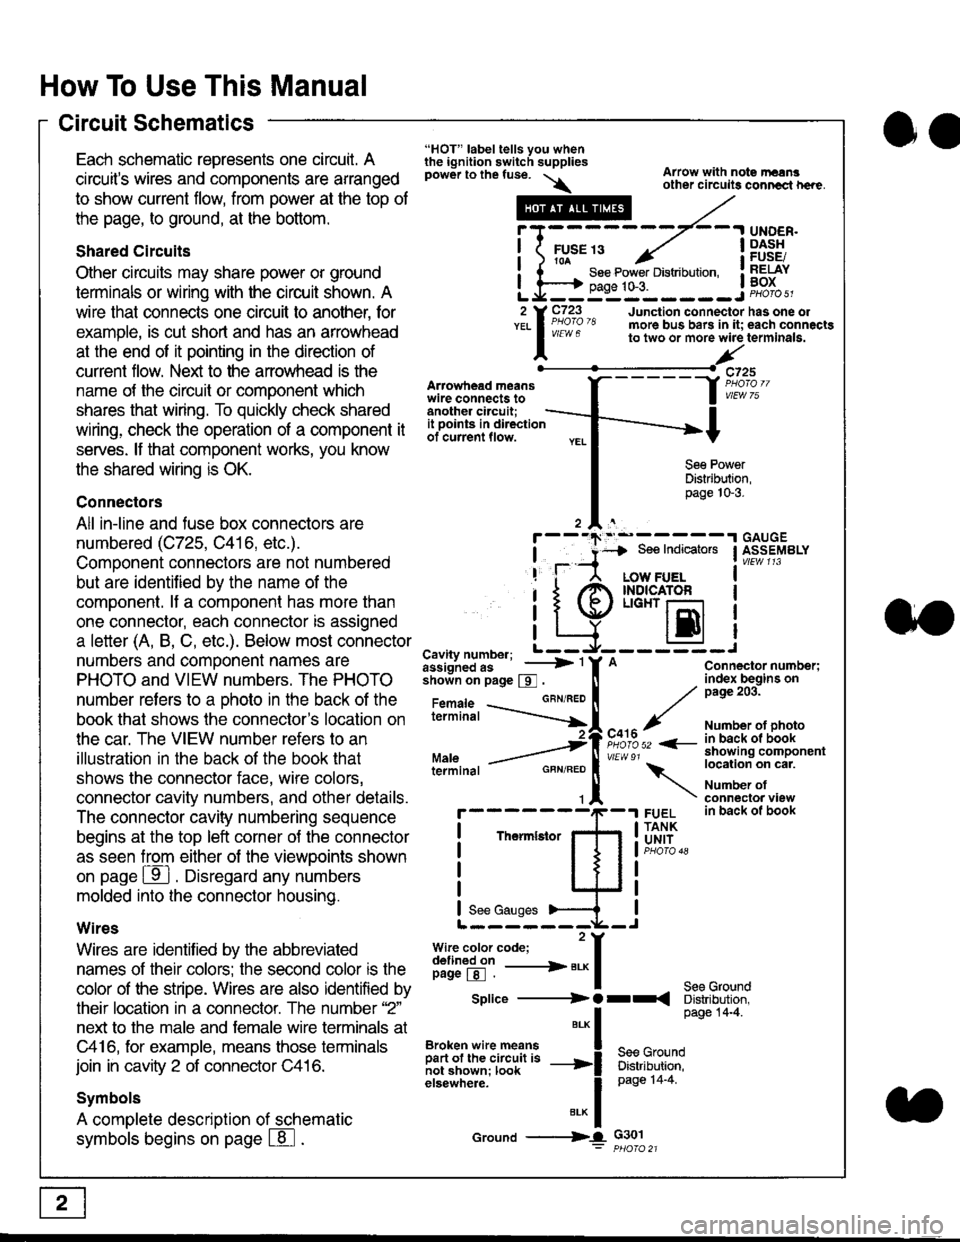 HONDA CIVIC 1997 6.G Workshop Manual How To Use This Manual
Circuit Schematics
oa
Each schematic represents one circult. A
circuits wires and components are arranged
to show current flow, from power at the top of
the page, to ground, at